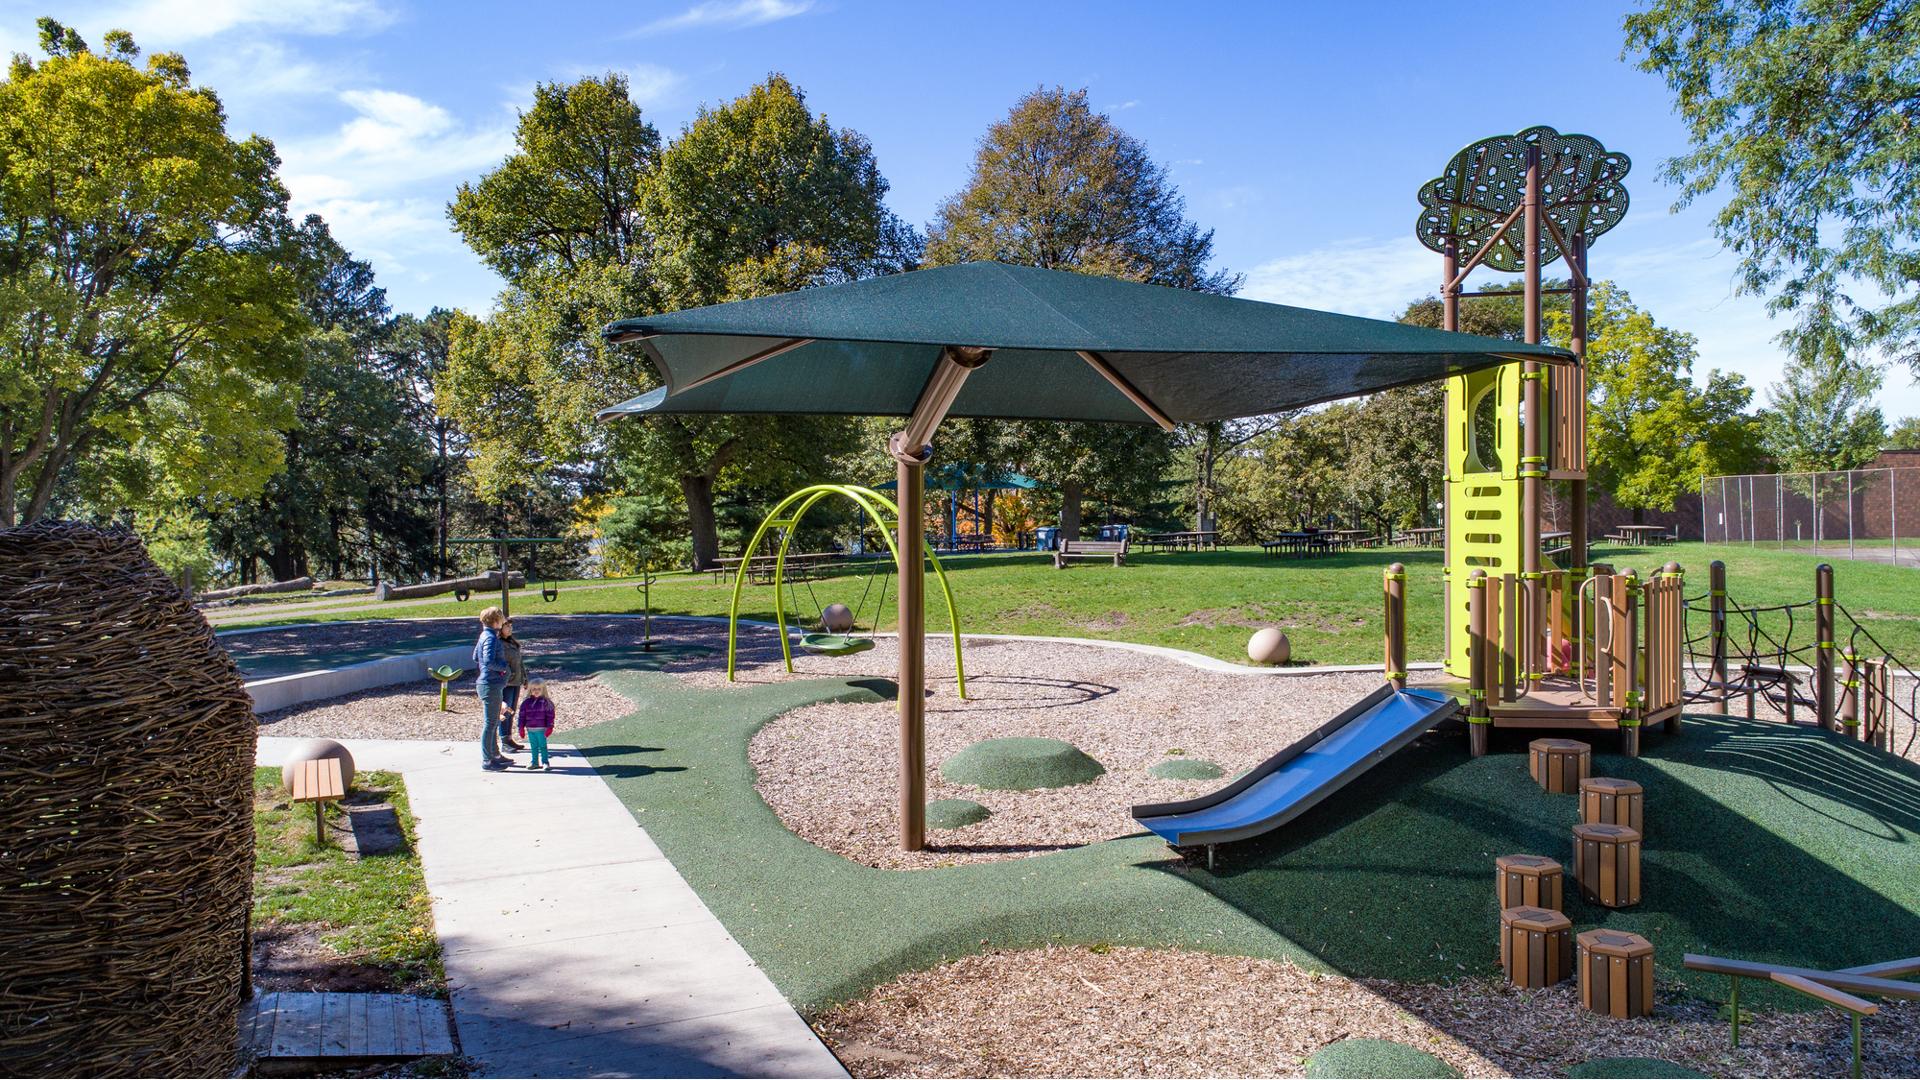 Lake Nokomis Community Center
Minneapolis, MN is a nature-inspired playground featuring a custom climber, custom log steppers and stainless steel slide. The custom SkyWays® shade structure, SlideWinder and custom roofs and tree post toppers carry the natural playground theme throughout.